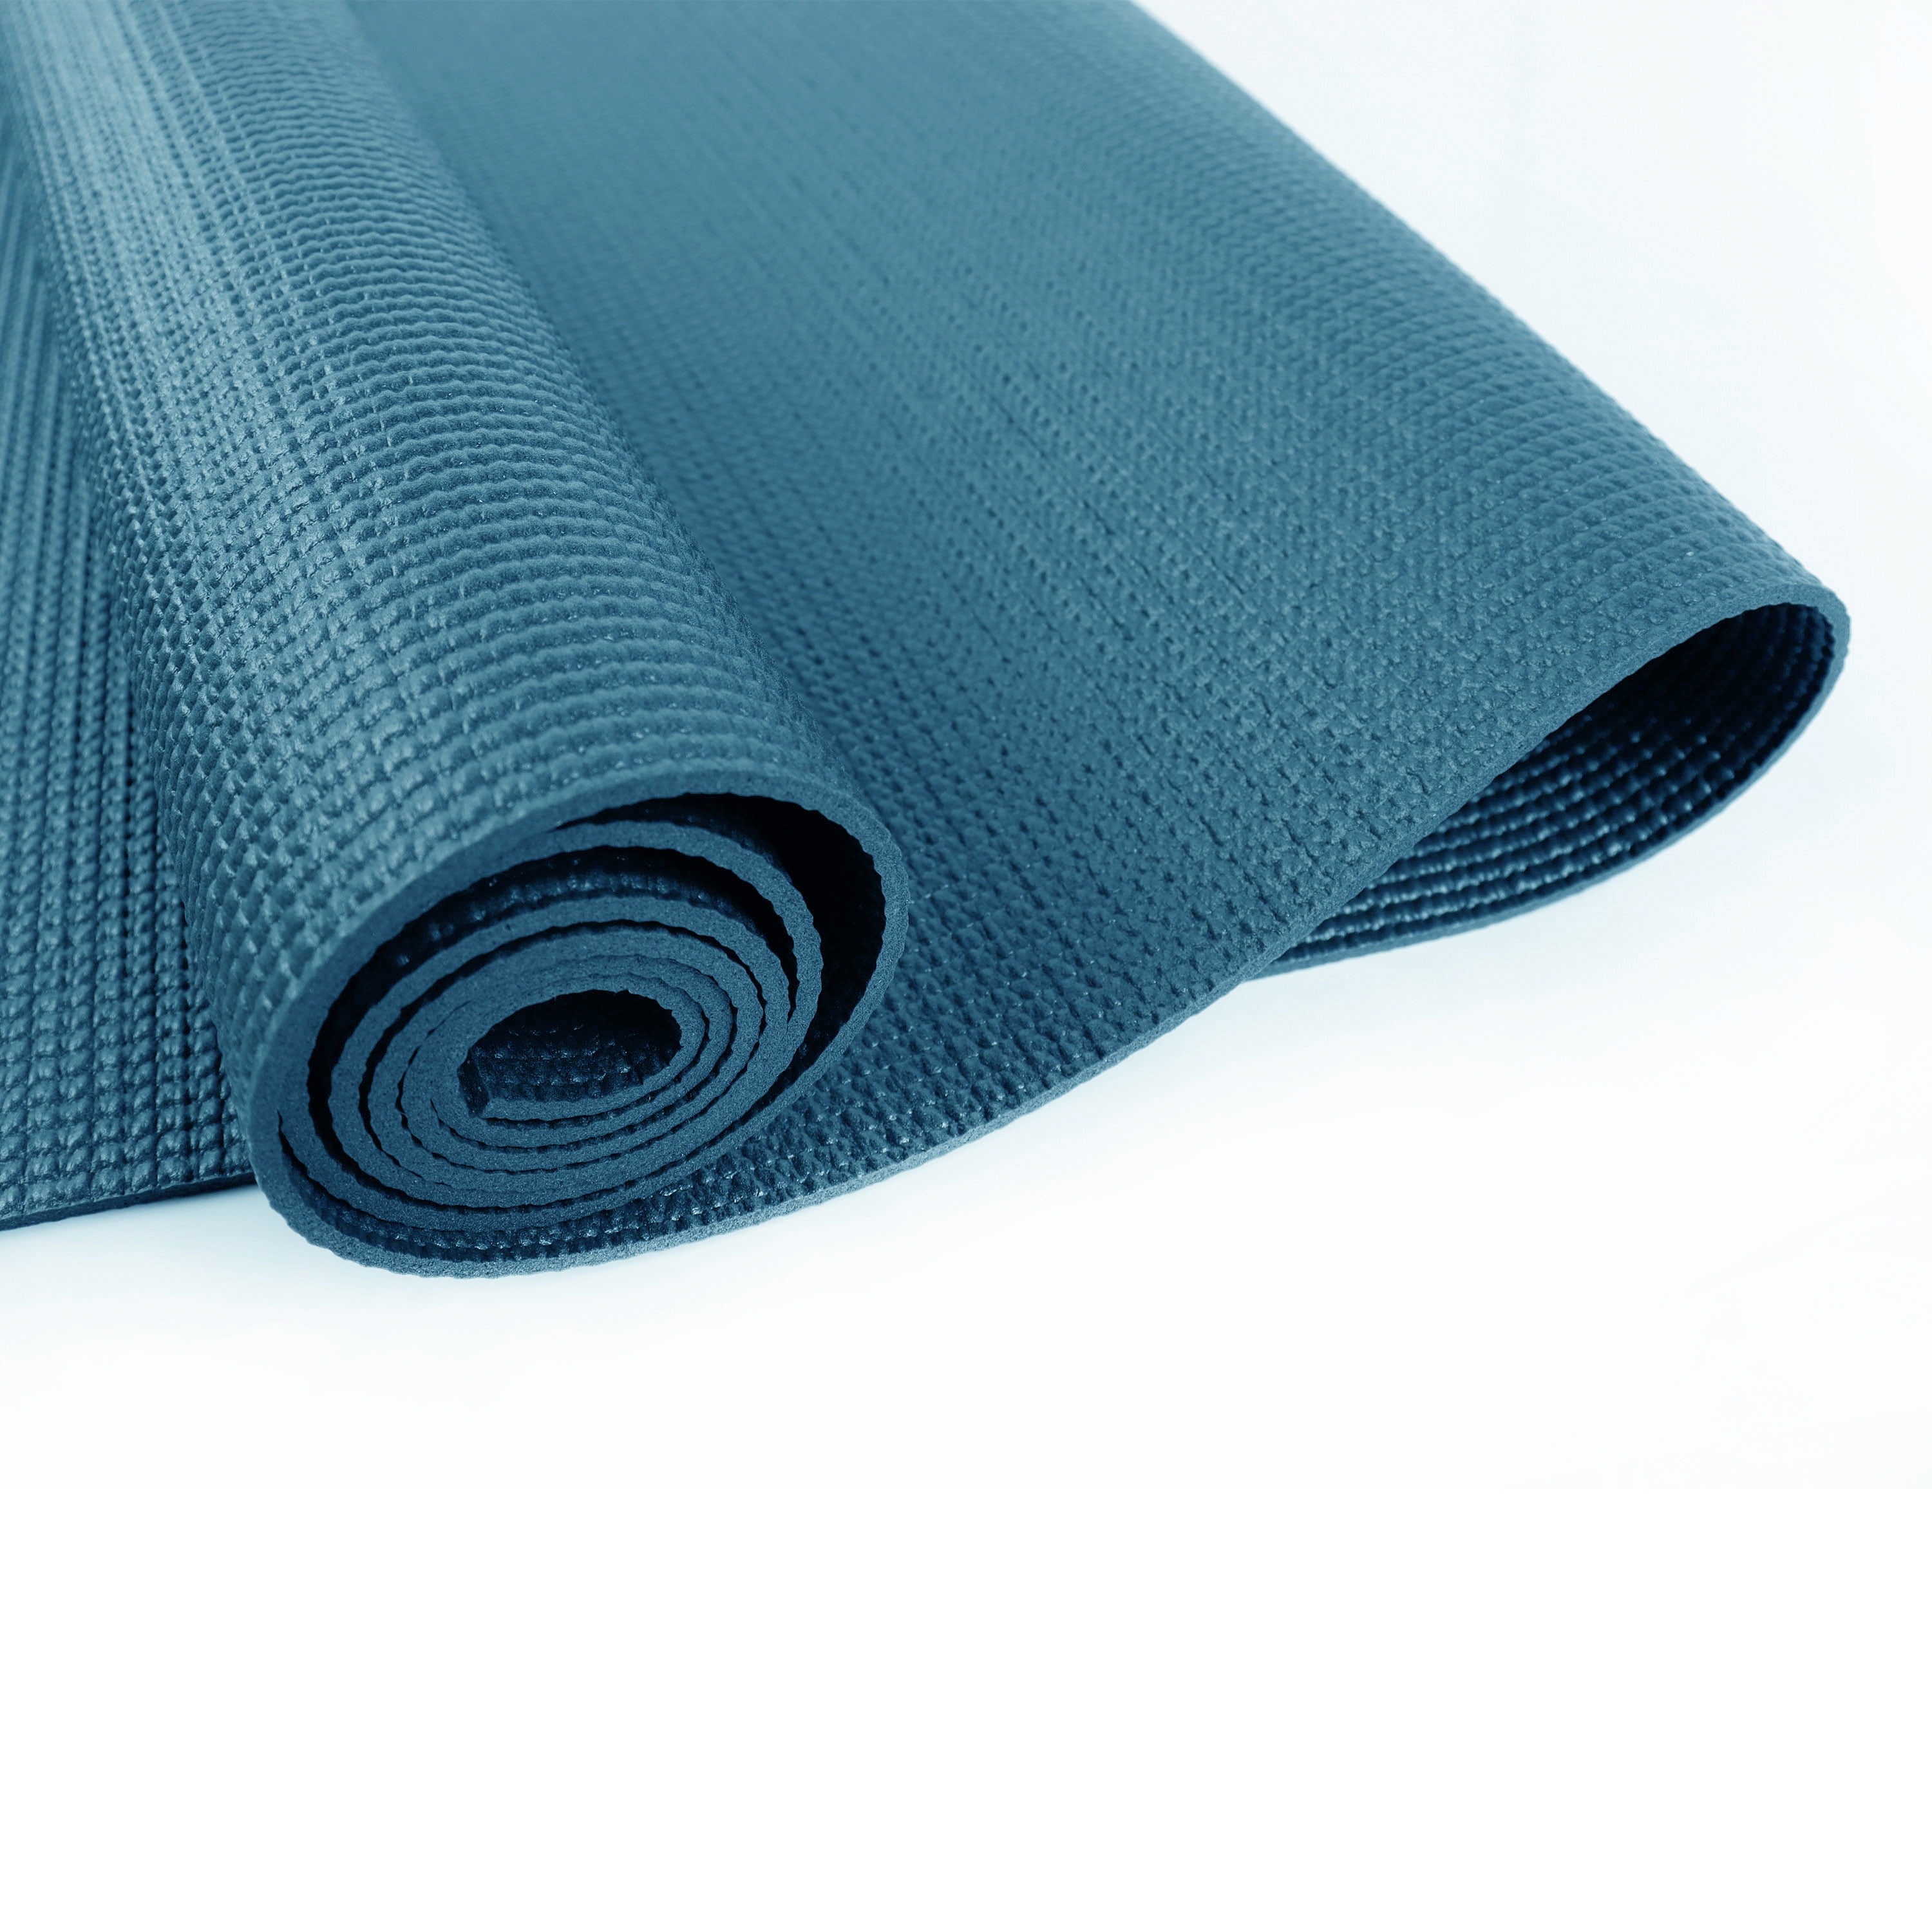 Athletic Works PVC Mat, 3mm, Real 68inx24in, Non Cushioning Support and Stability - Walmart.com